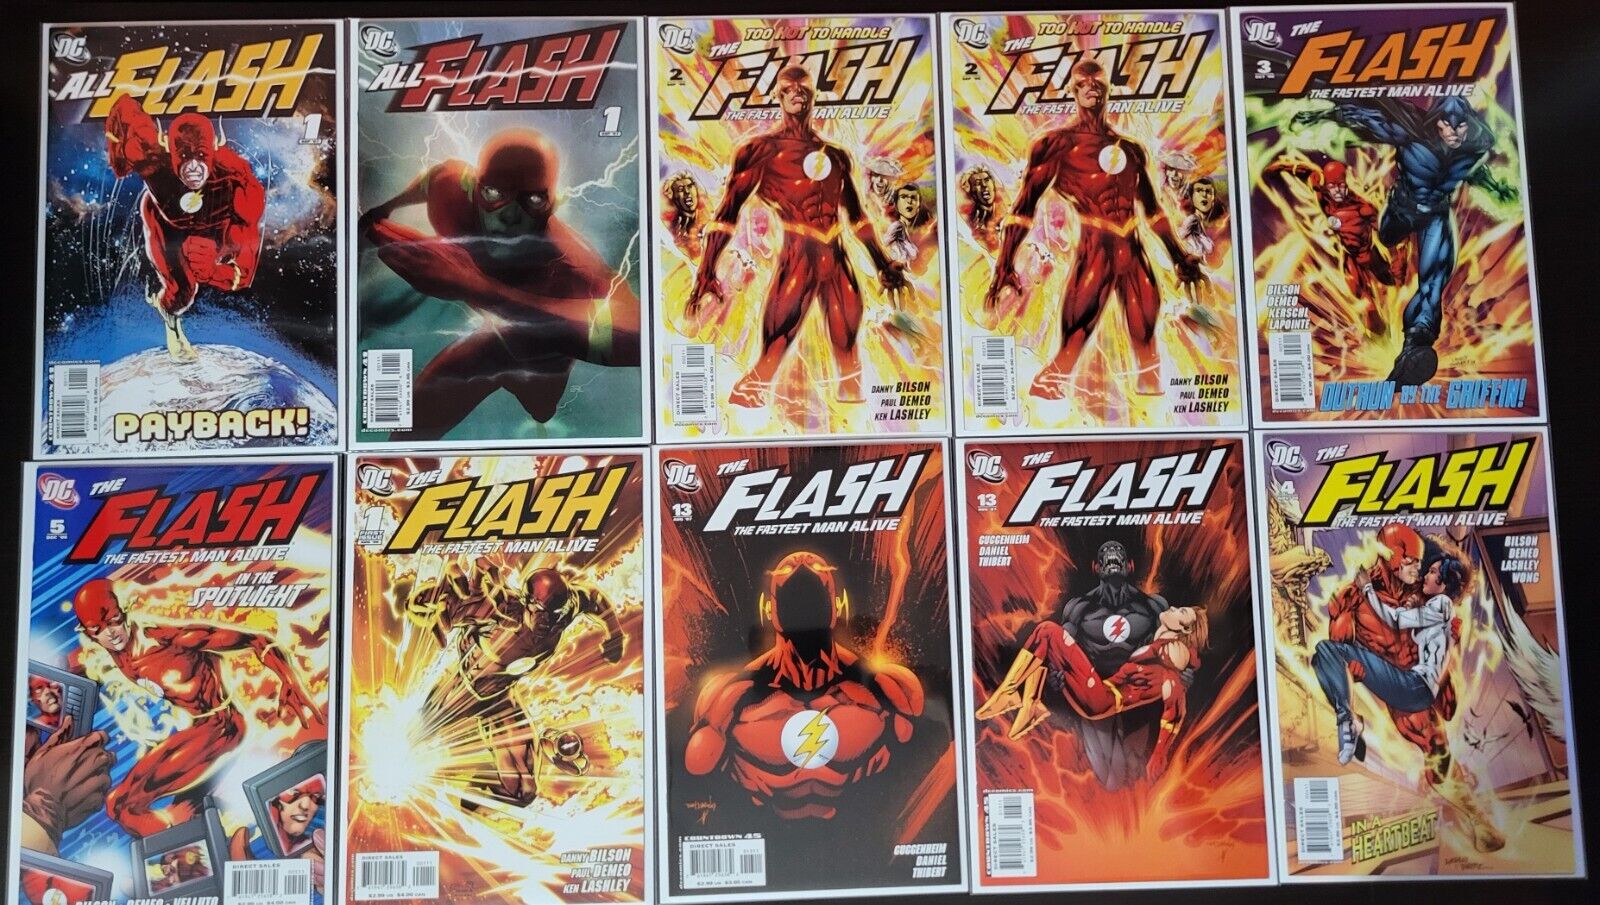 The Flash #1 - #5 + #13 + All Flash #1 DC 2006 2007 Lot of 10